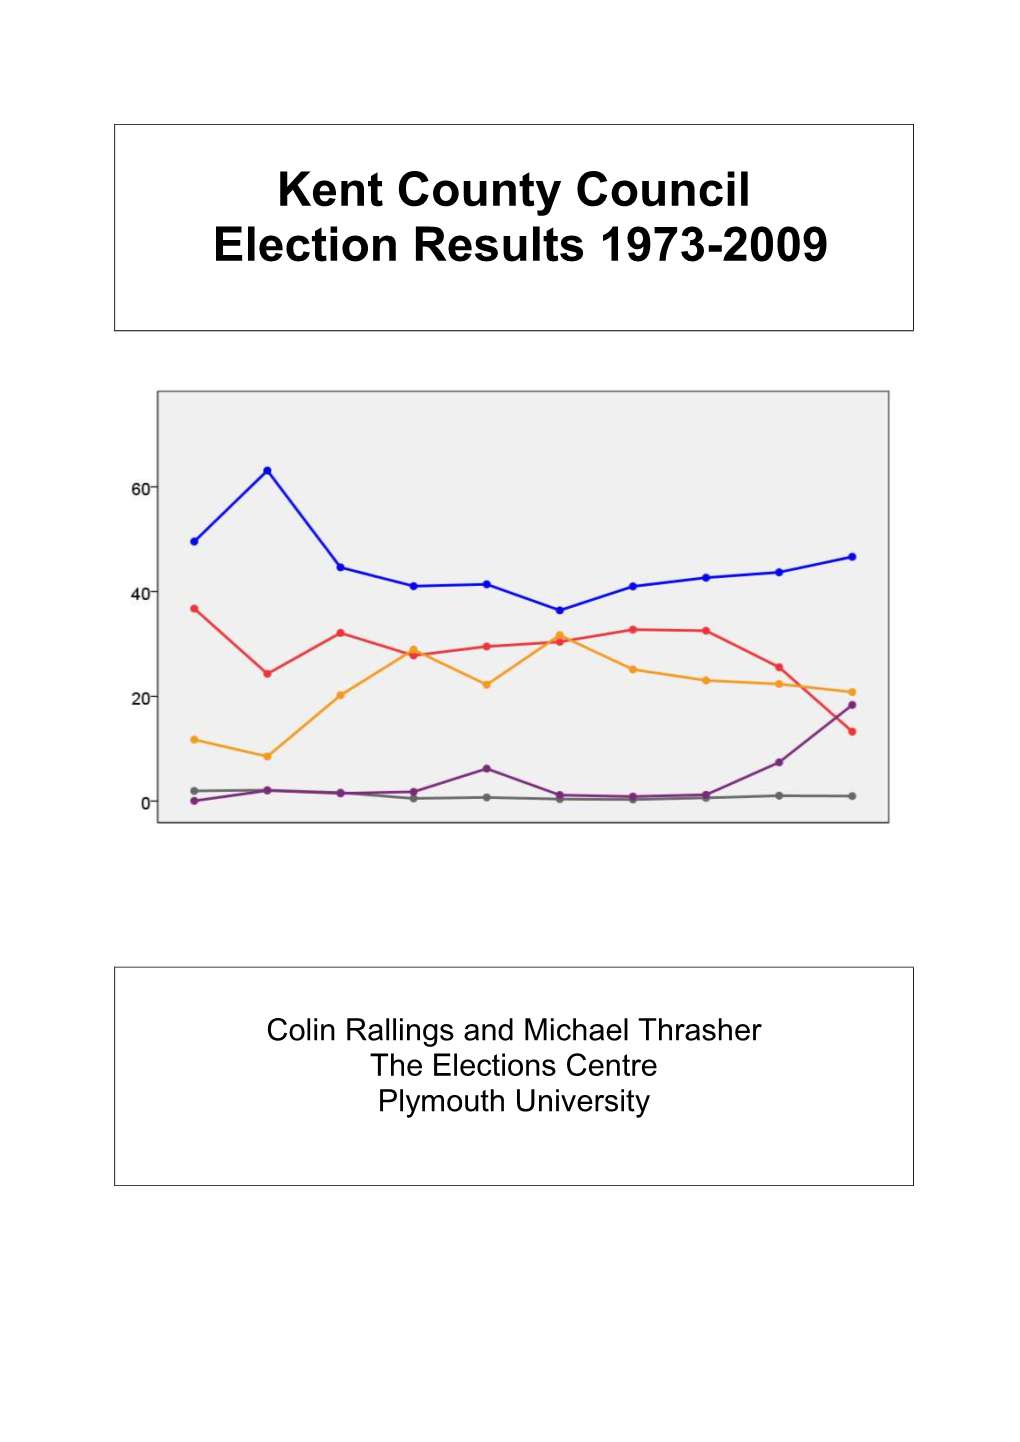 Kent County Council Election Results 1973-2009